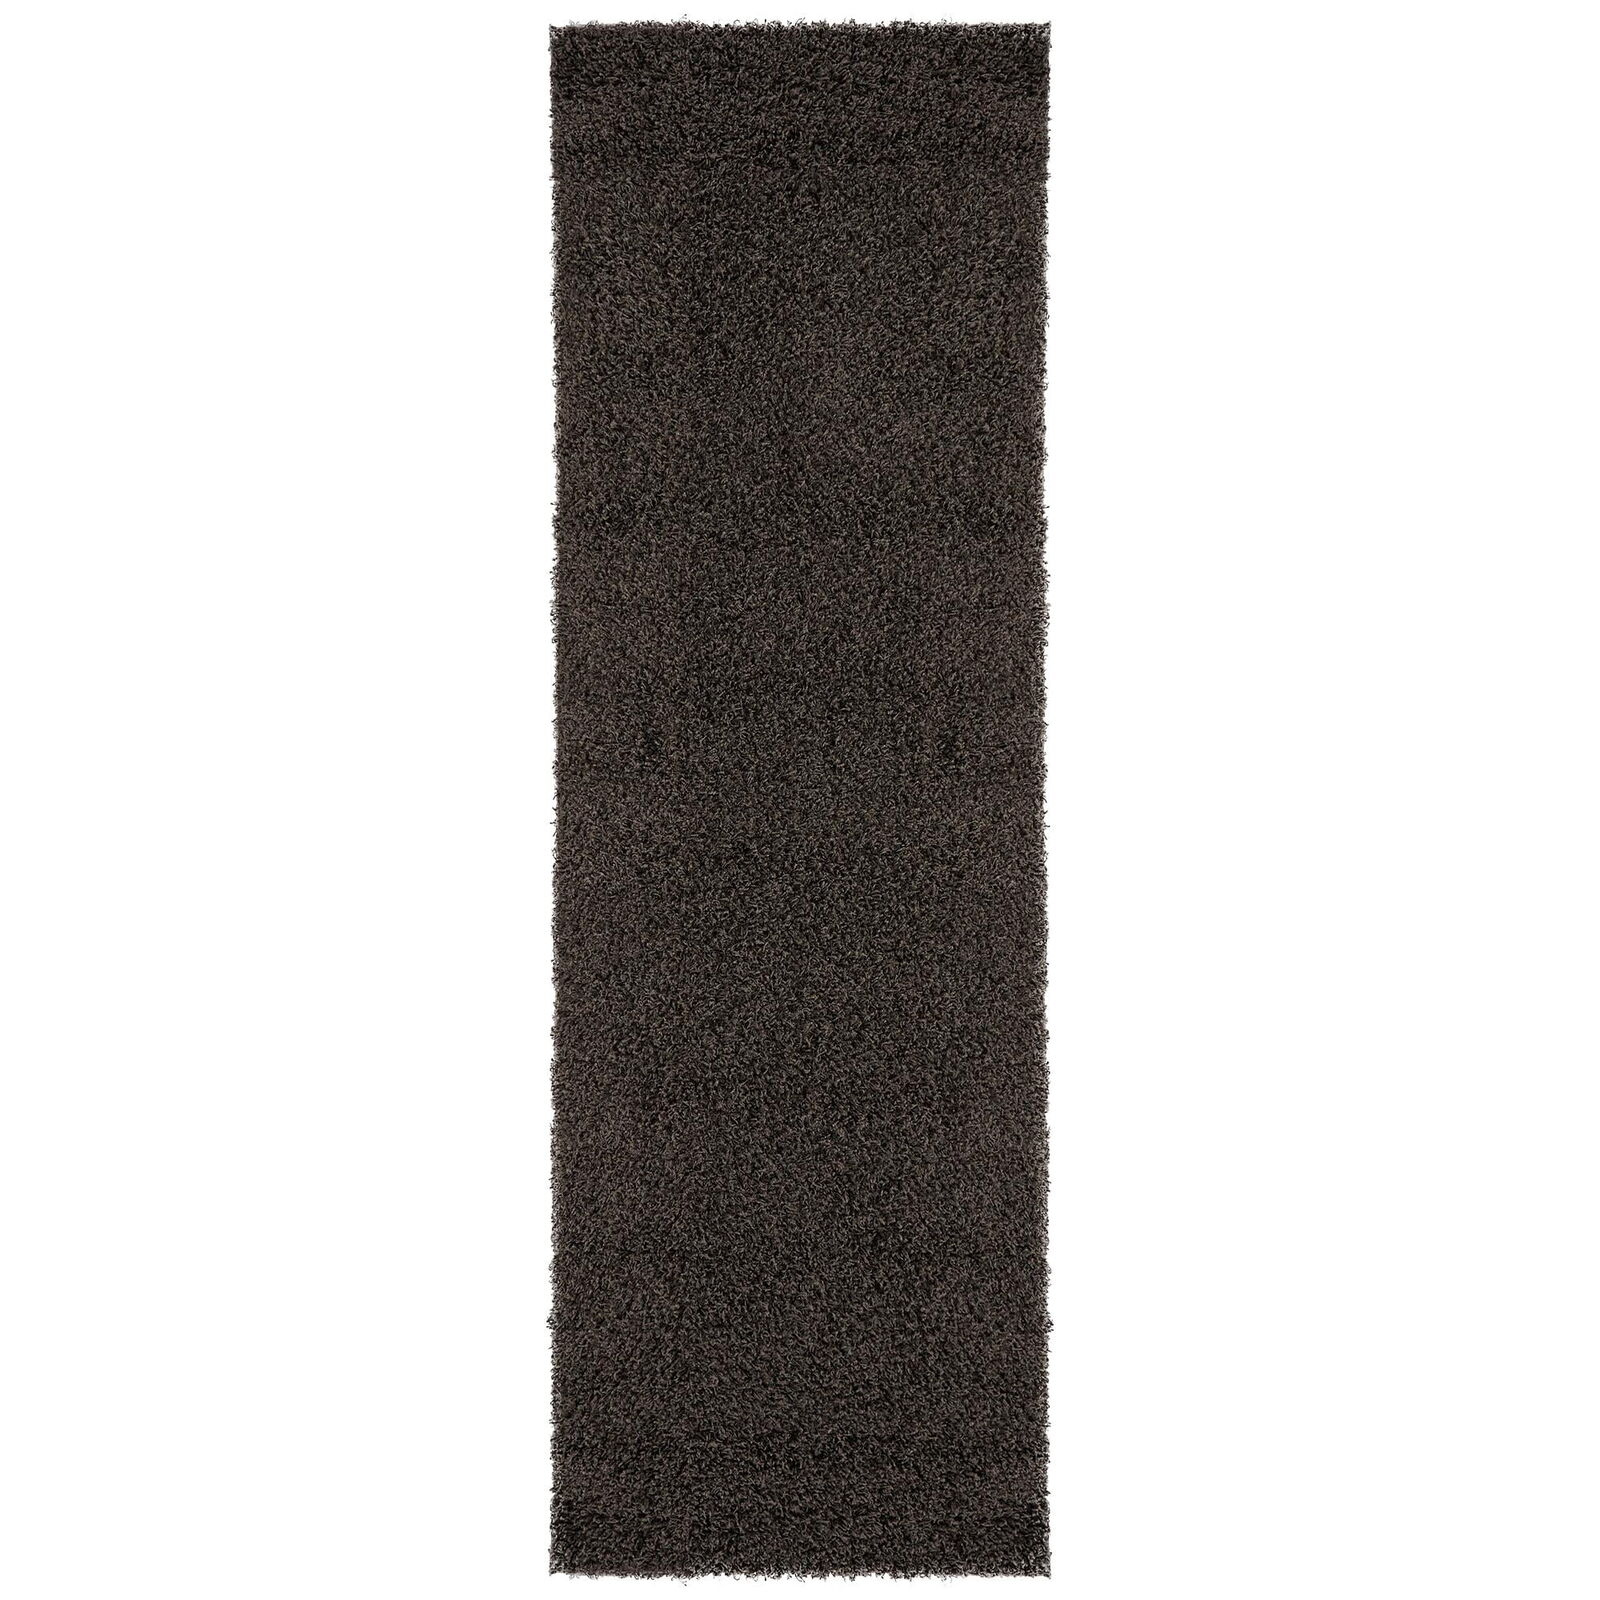 Softy Non-Slip Rubberback Solid 2x6 Soft Indoor Runner Rug, 2\' x 6\', Black